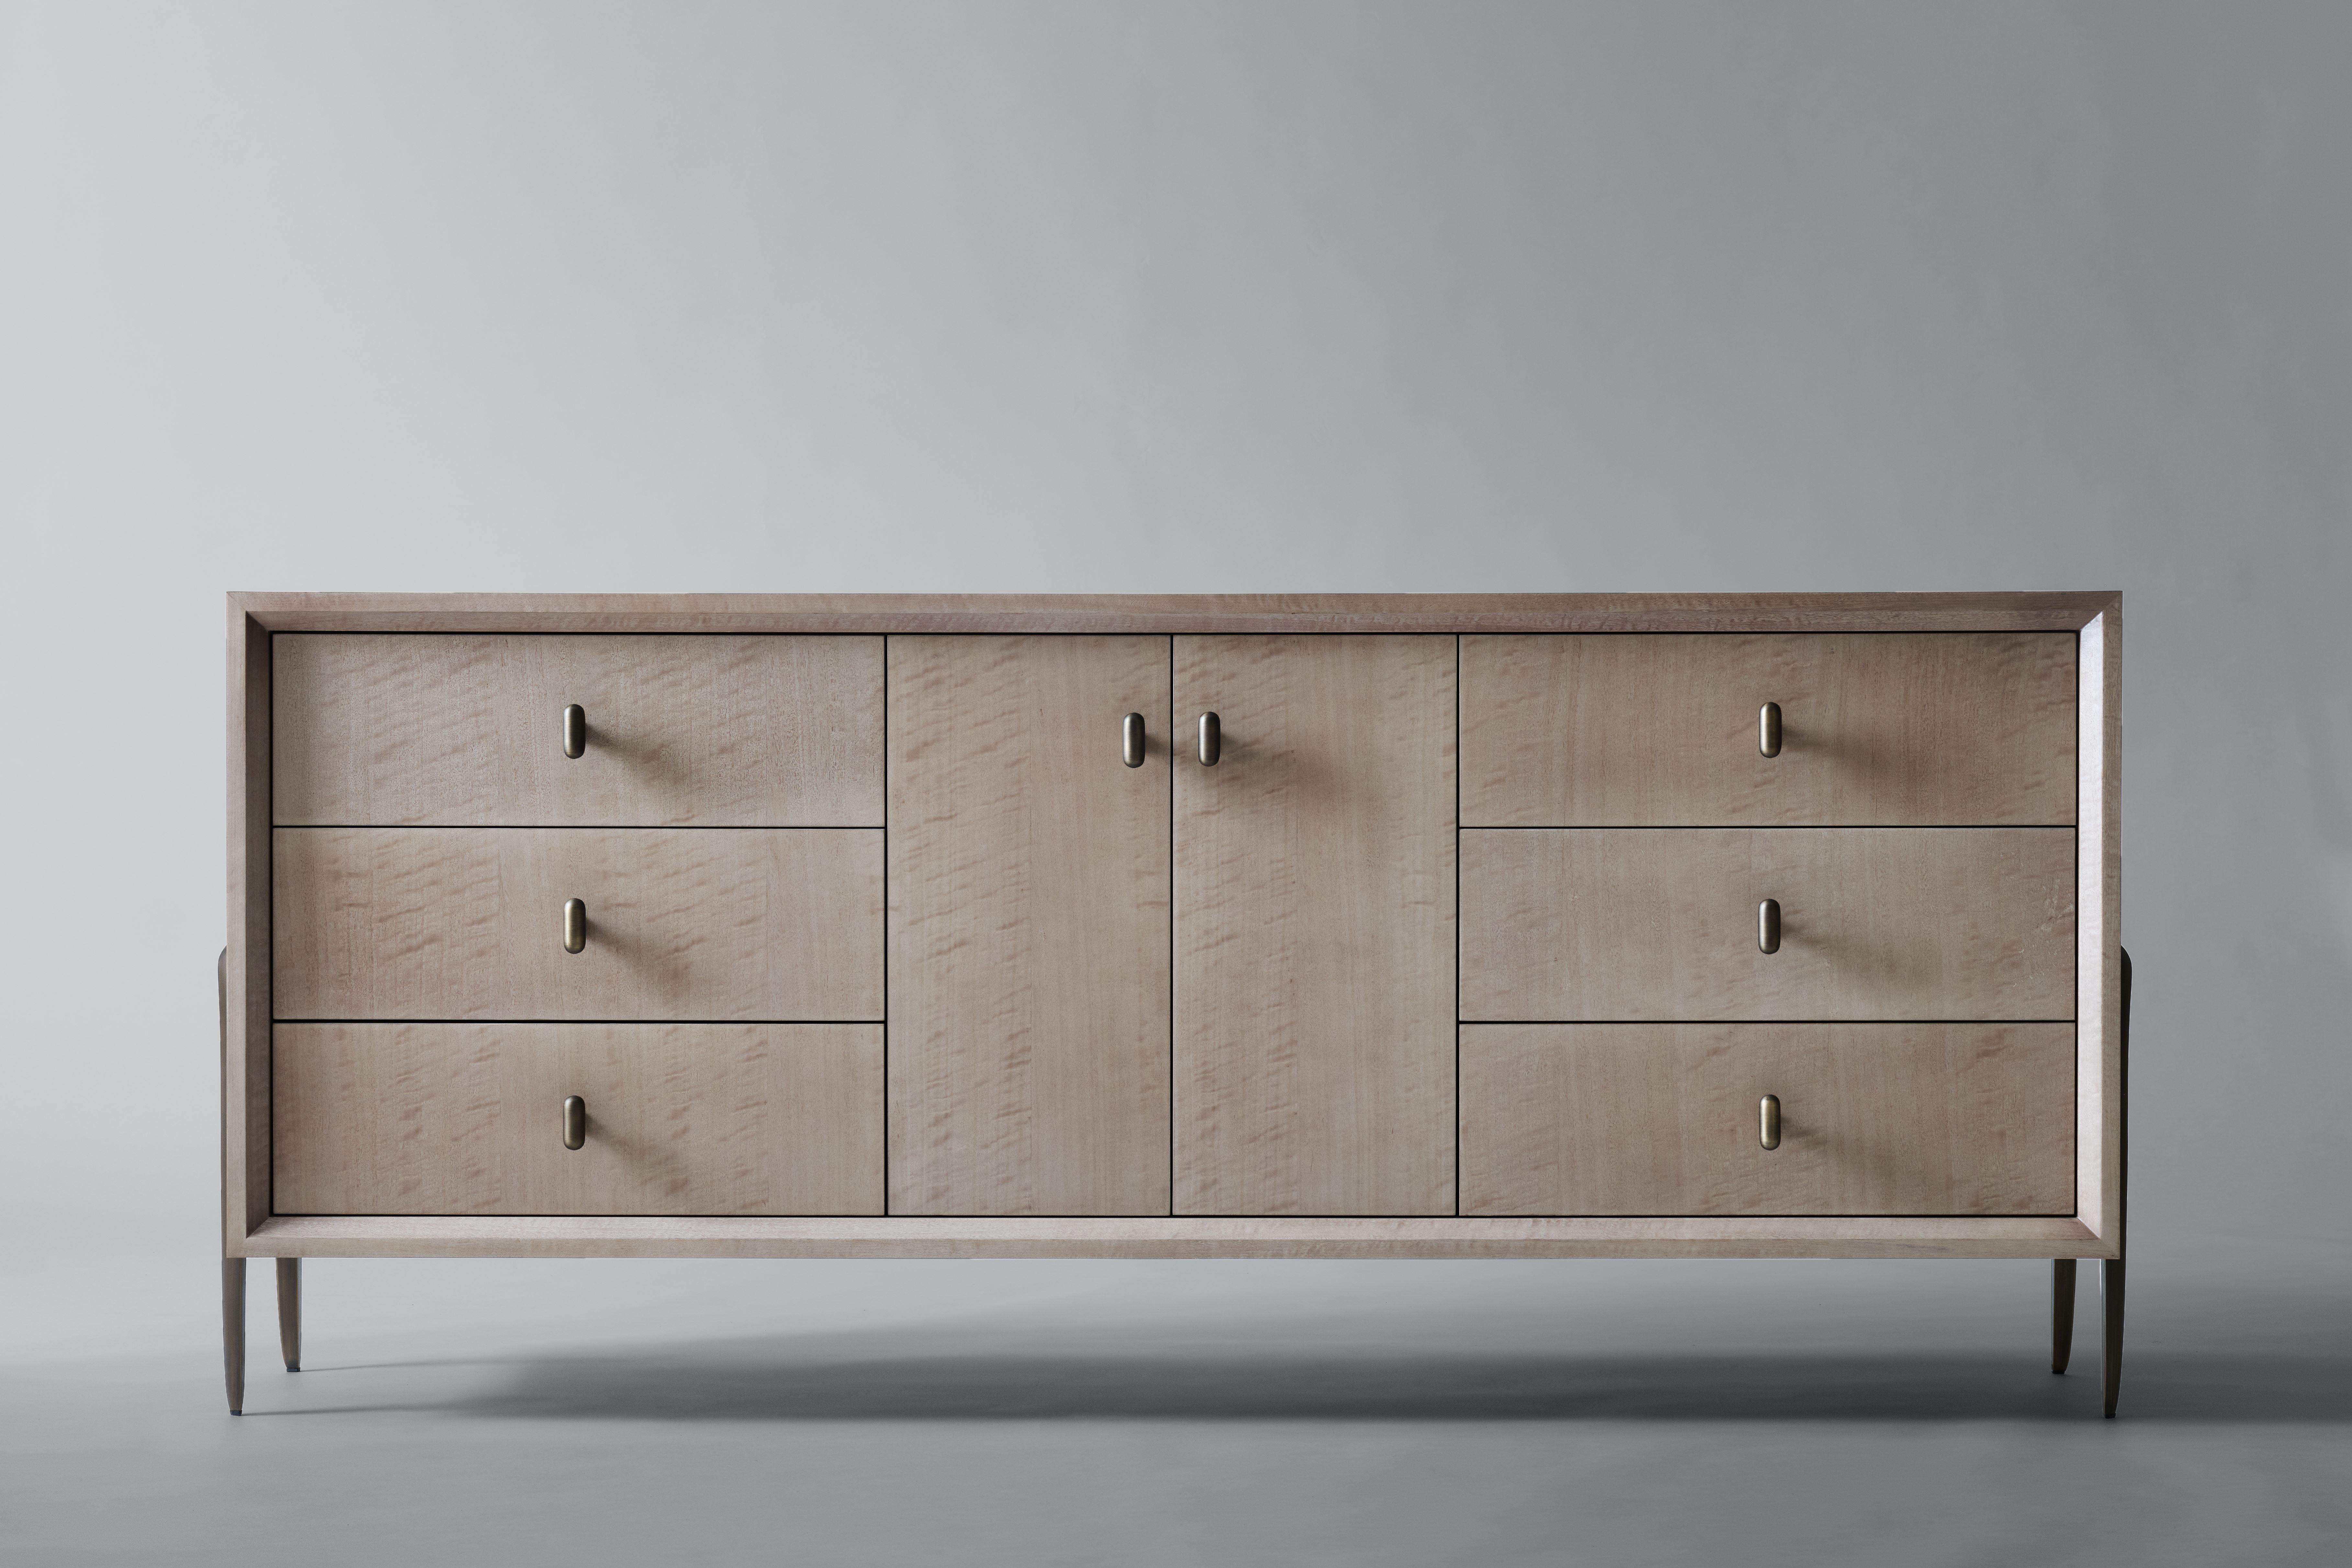 Informed by the refined craftsmanship of mid-century Italian design, the Serge Credenza features sculptural two-legged brackets, with a gently tapered silhouette and articulated edge. Nuanced millwork - beveled along the interior frame, with six